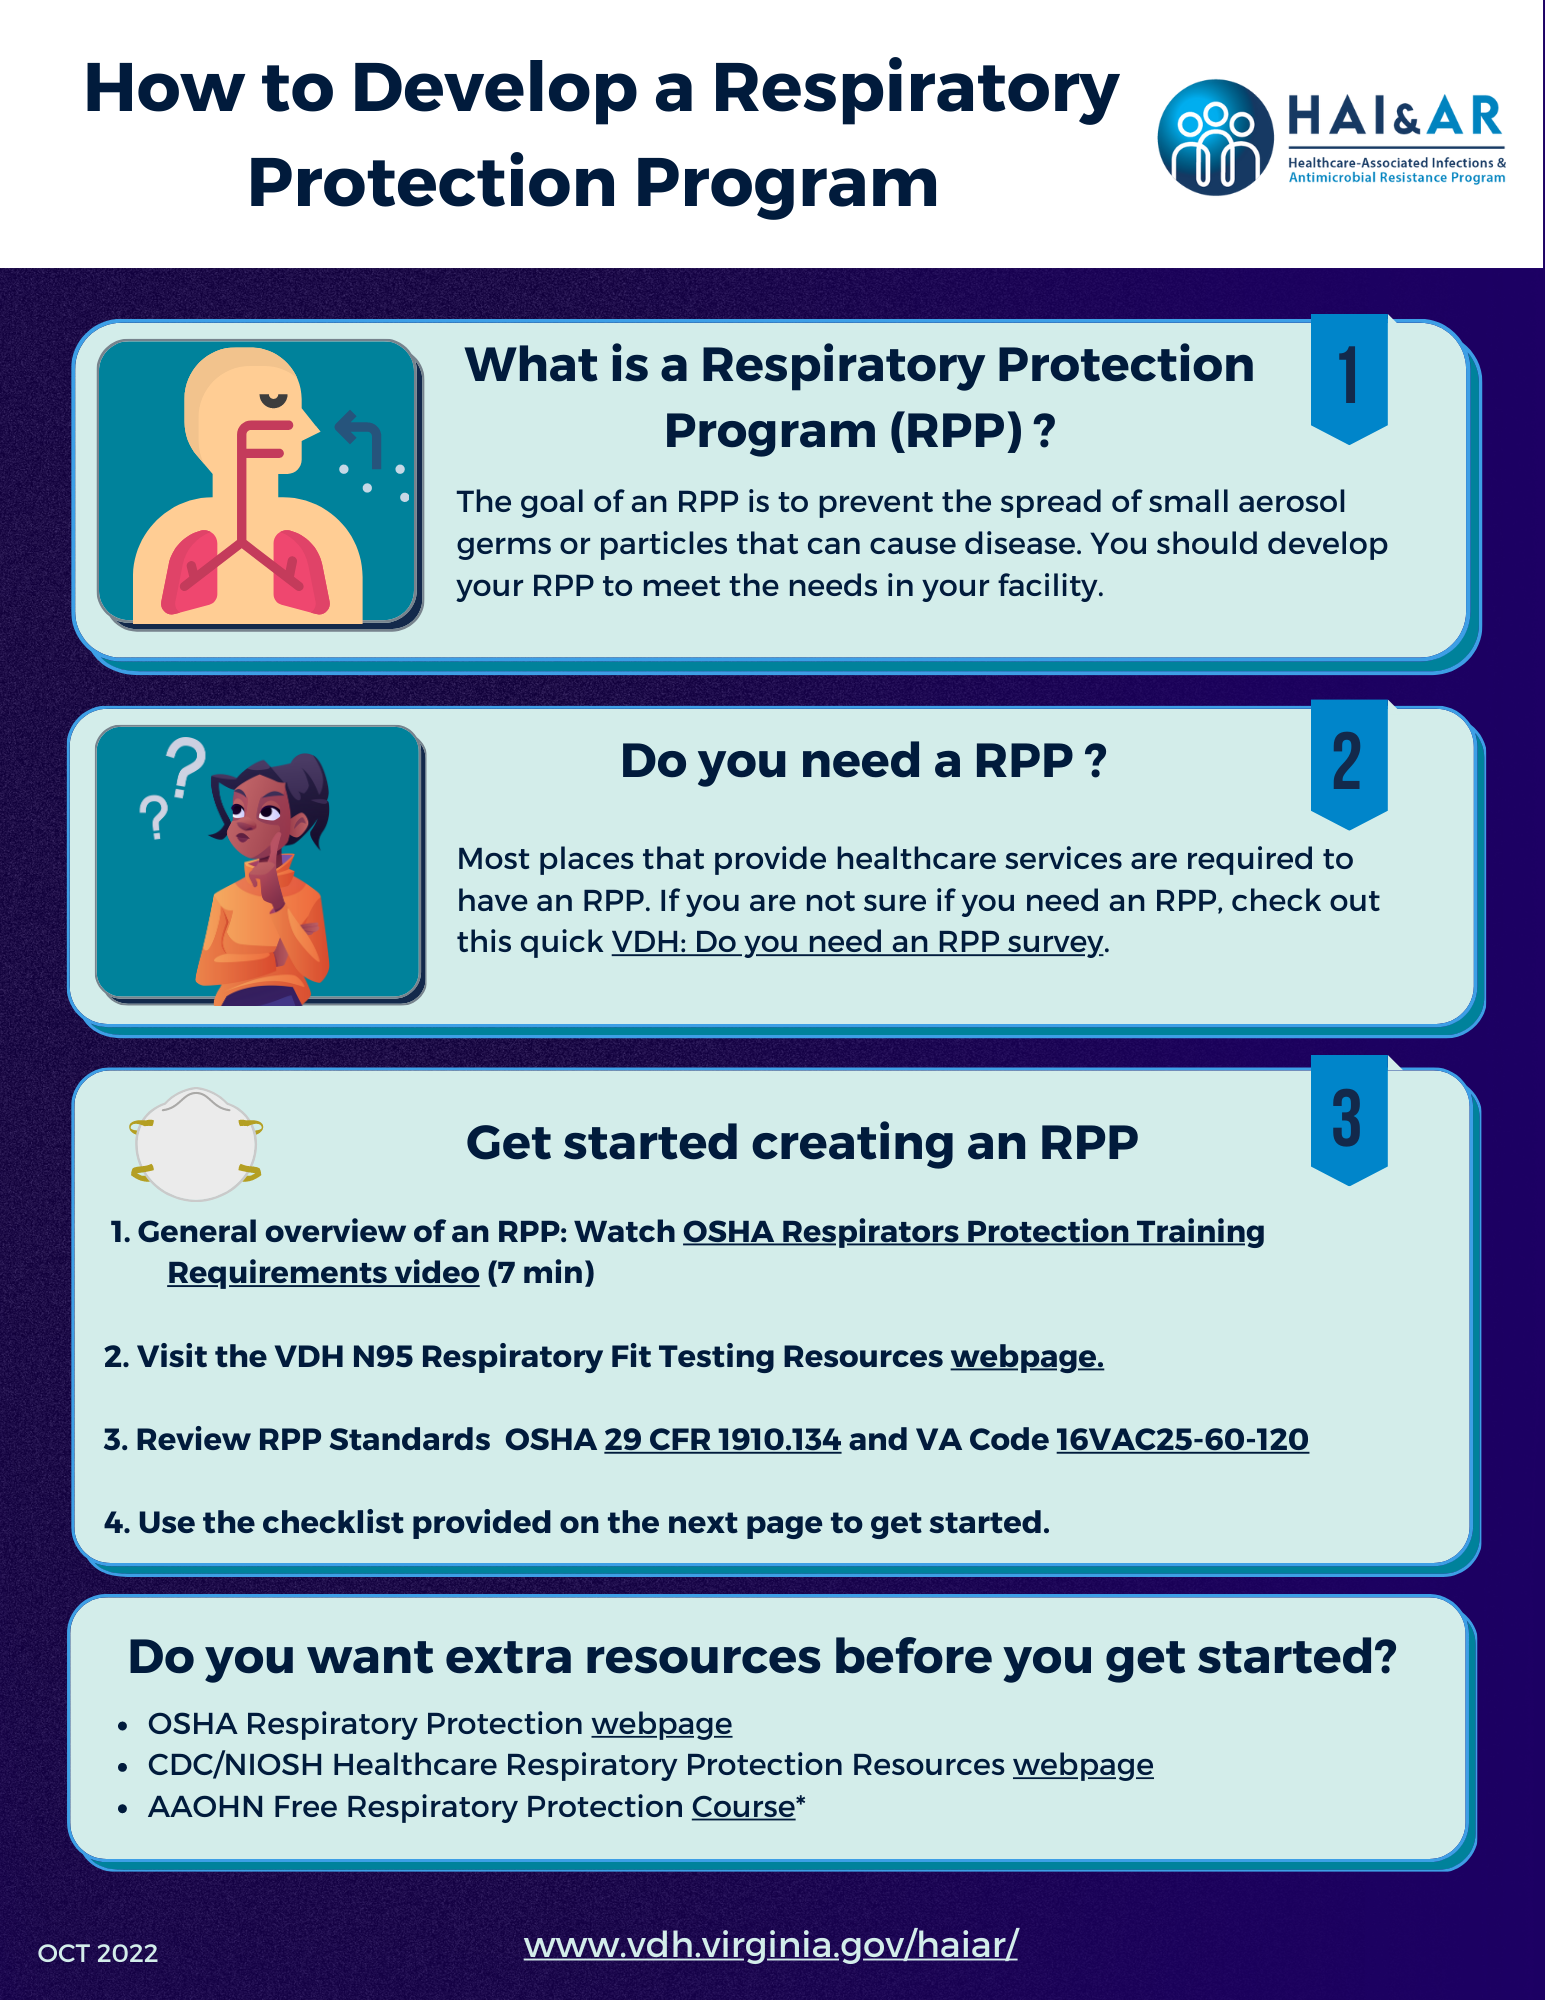 How to Develop a RPP